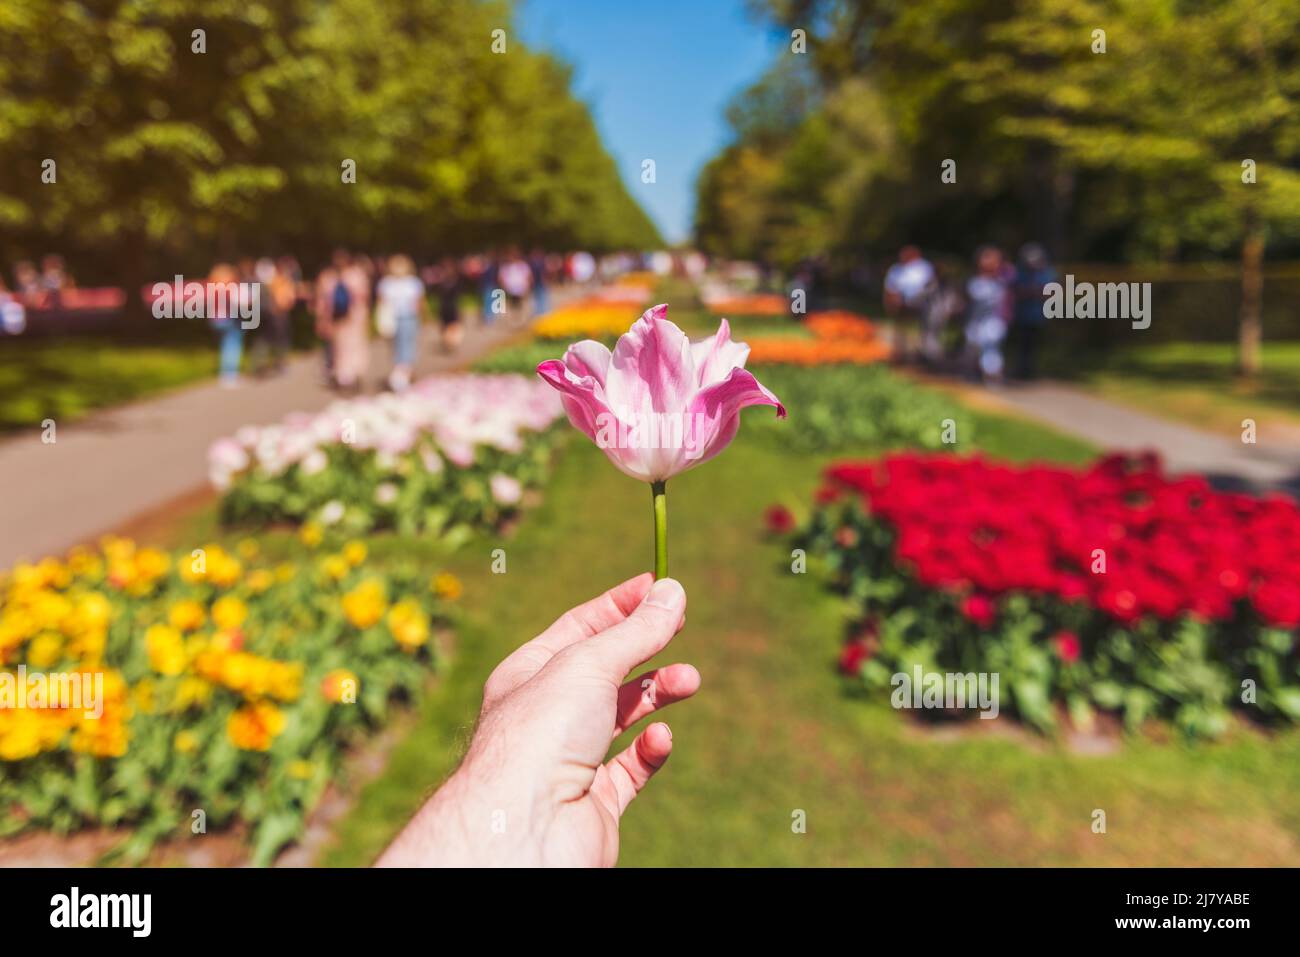 First Person Perspective on Male hand holding a Tulip at Keukenhof Gardens in Lisse The Netherlands, focus was on the foreground. Stock Photo